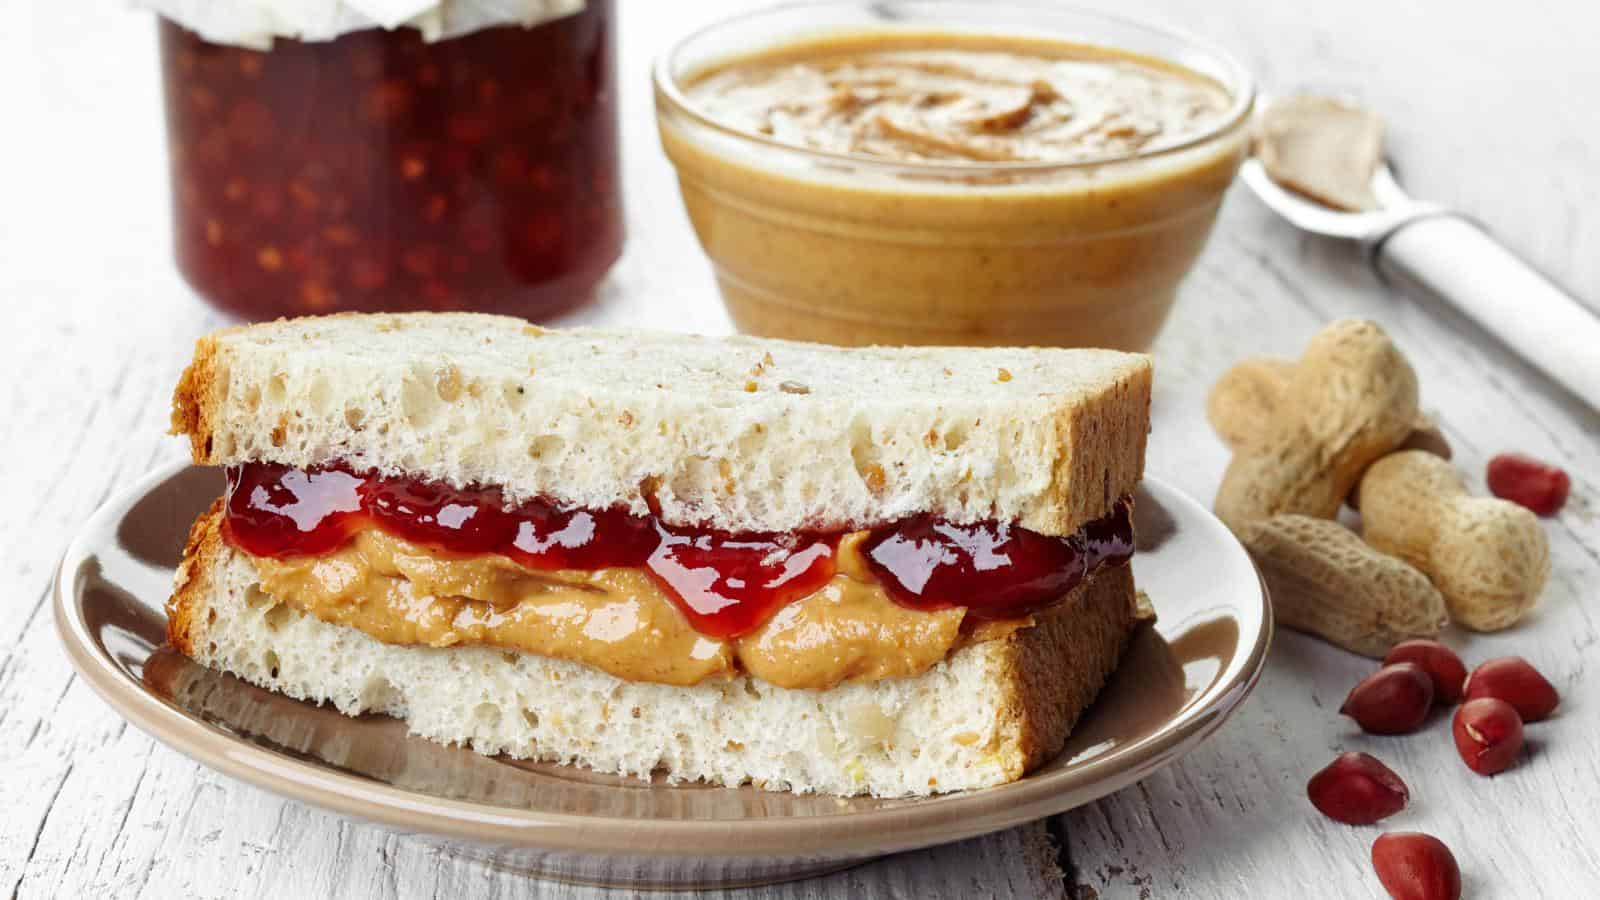 Peanut Butter and Jelly Sandwiches Are Great